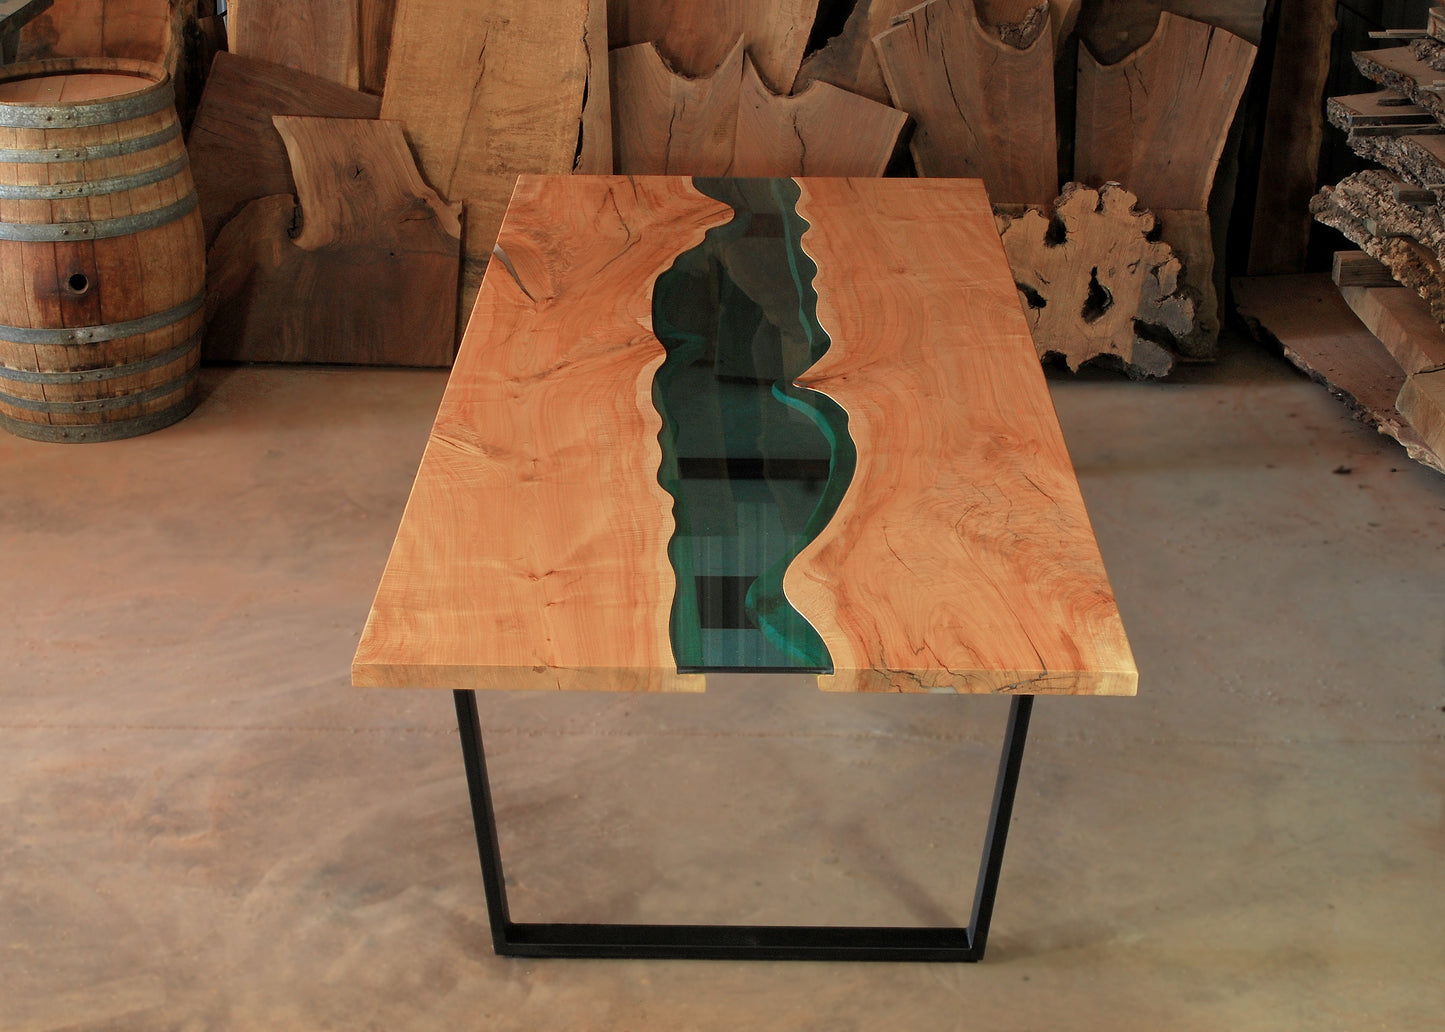 Maple glass river table